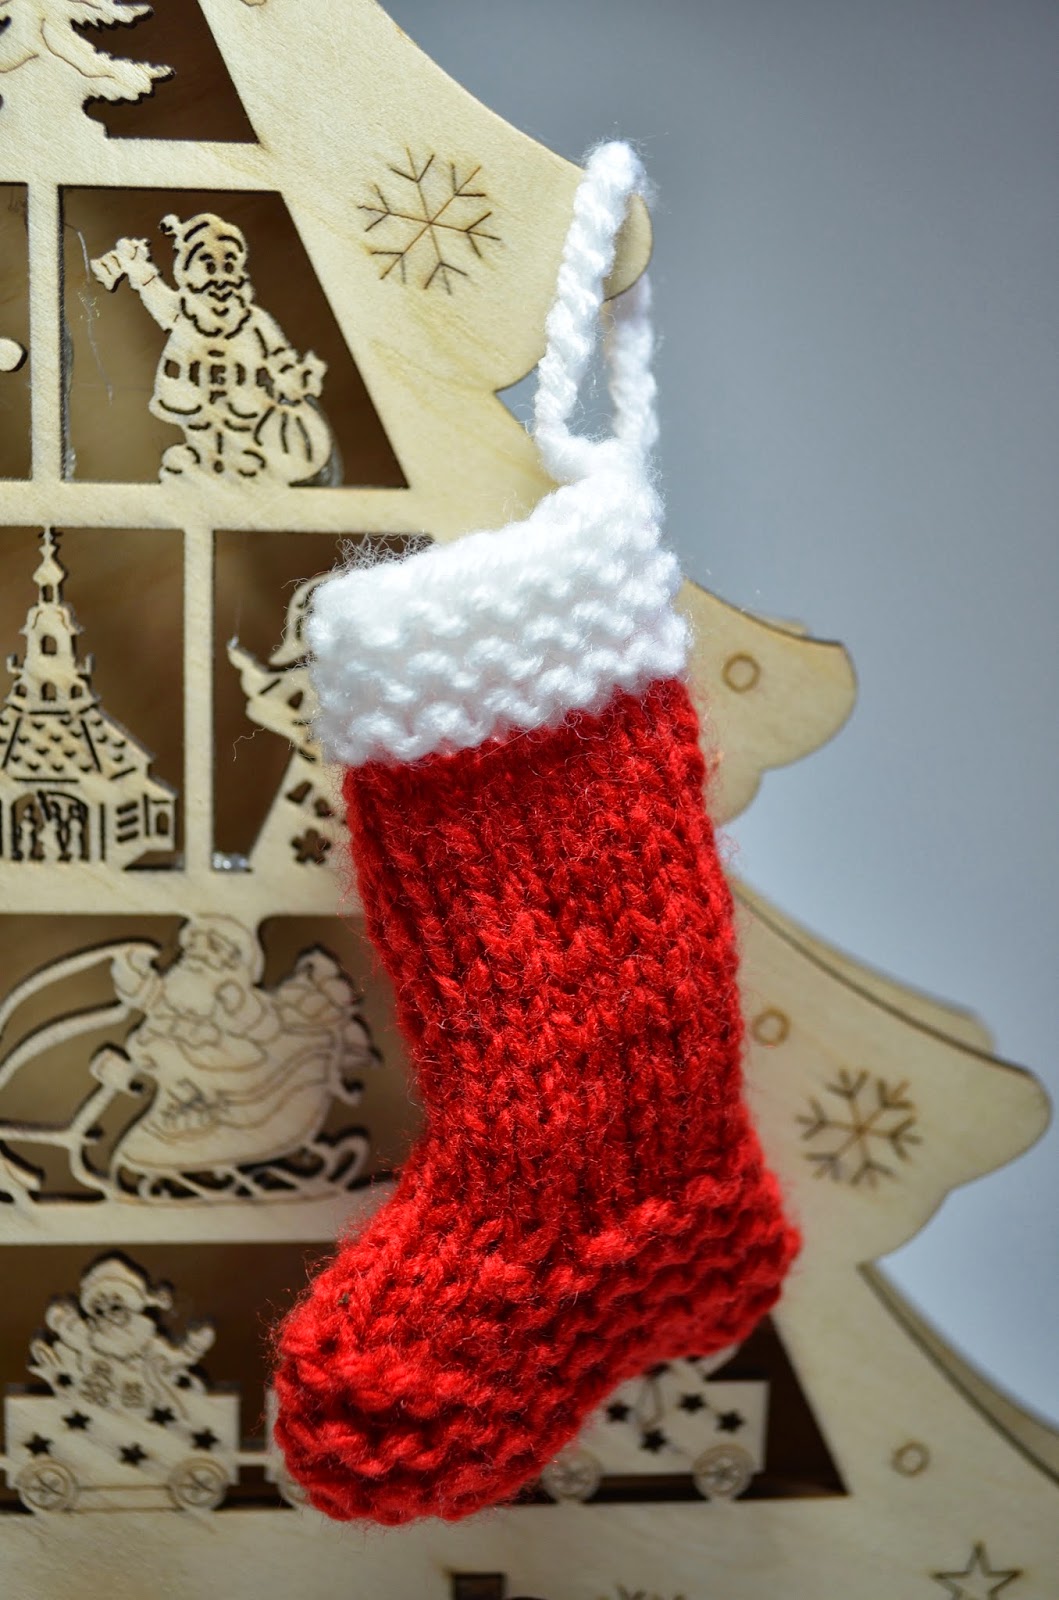 crafternoon garden Knitted Christmas Stocking...